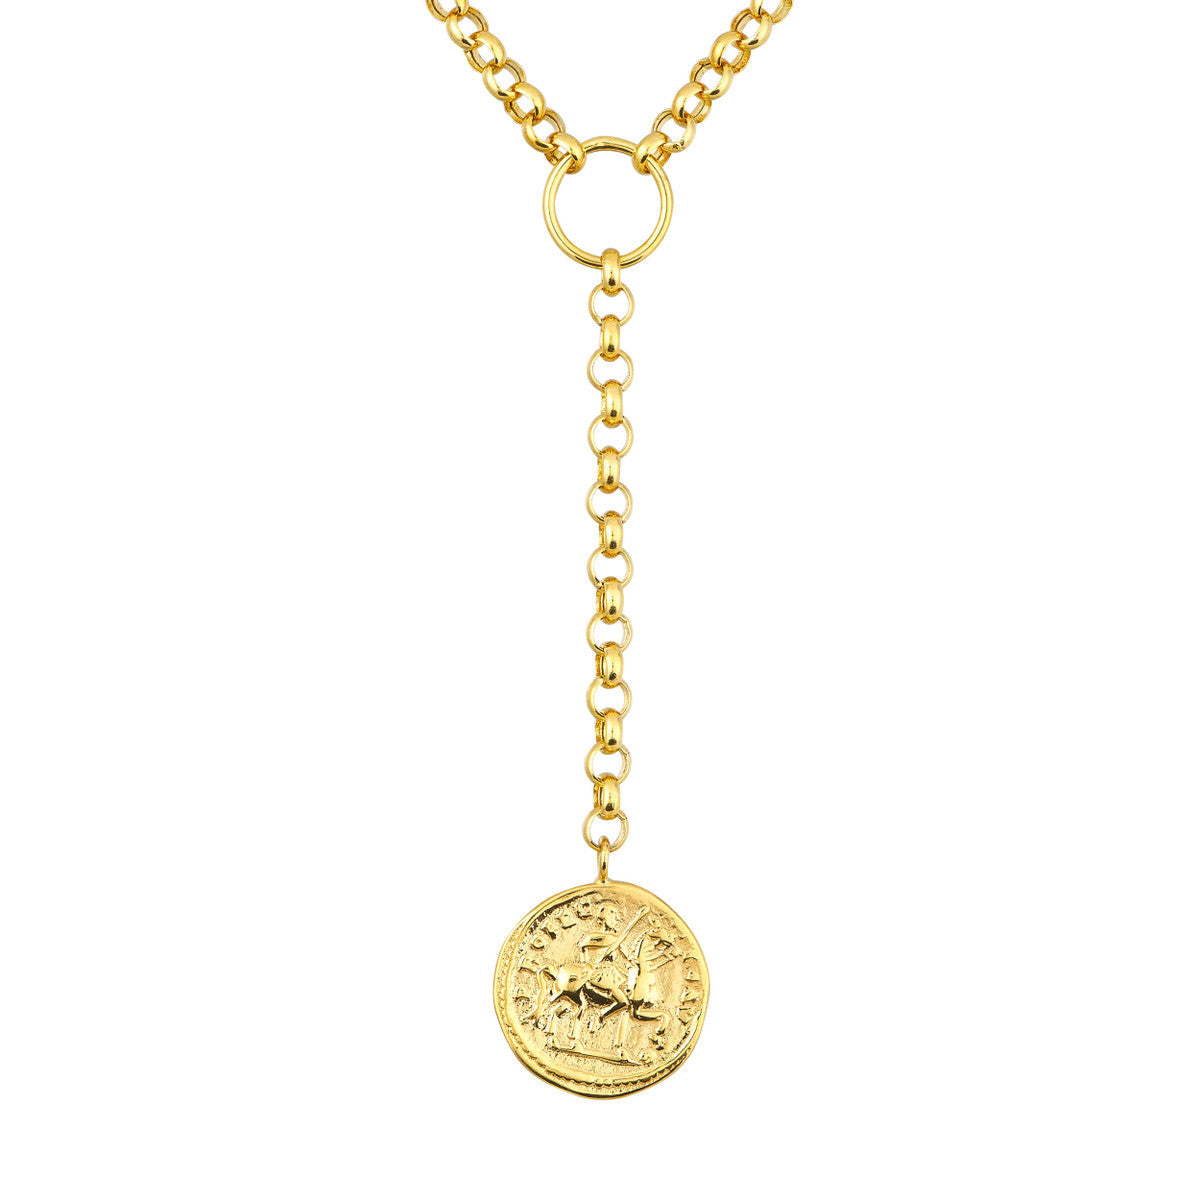 14K GOLD COIN LARIAT NECKLACE